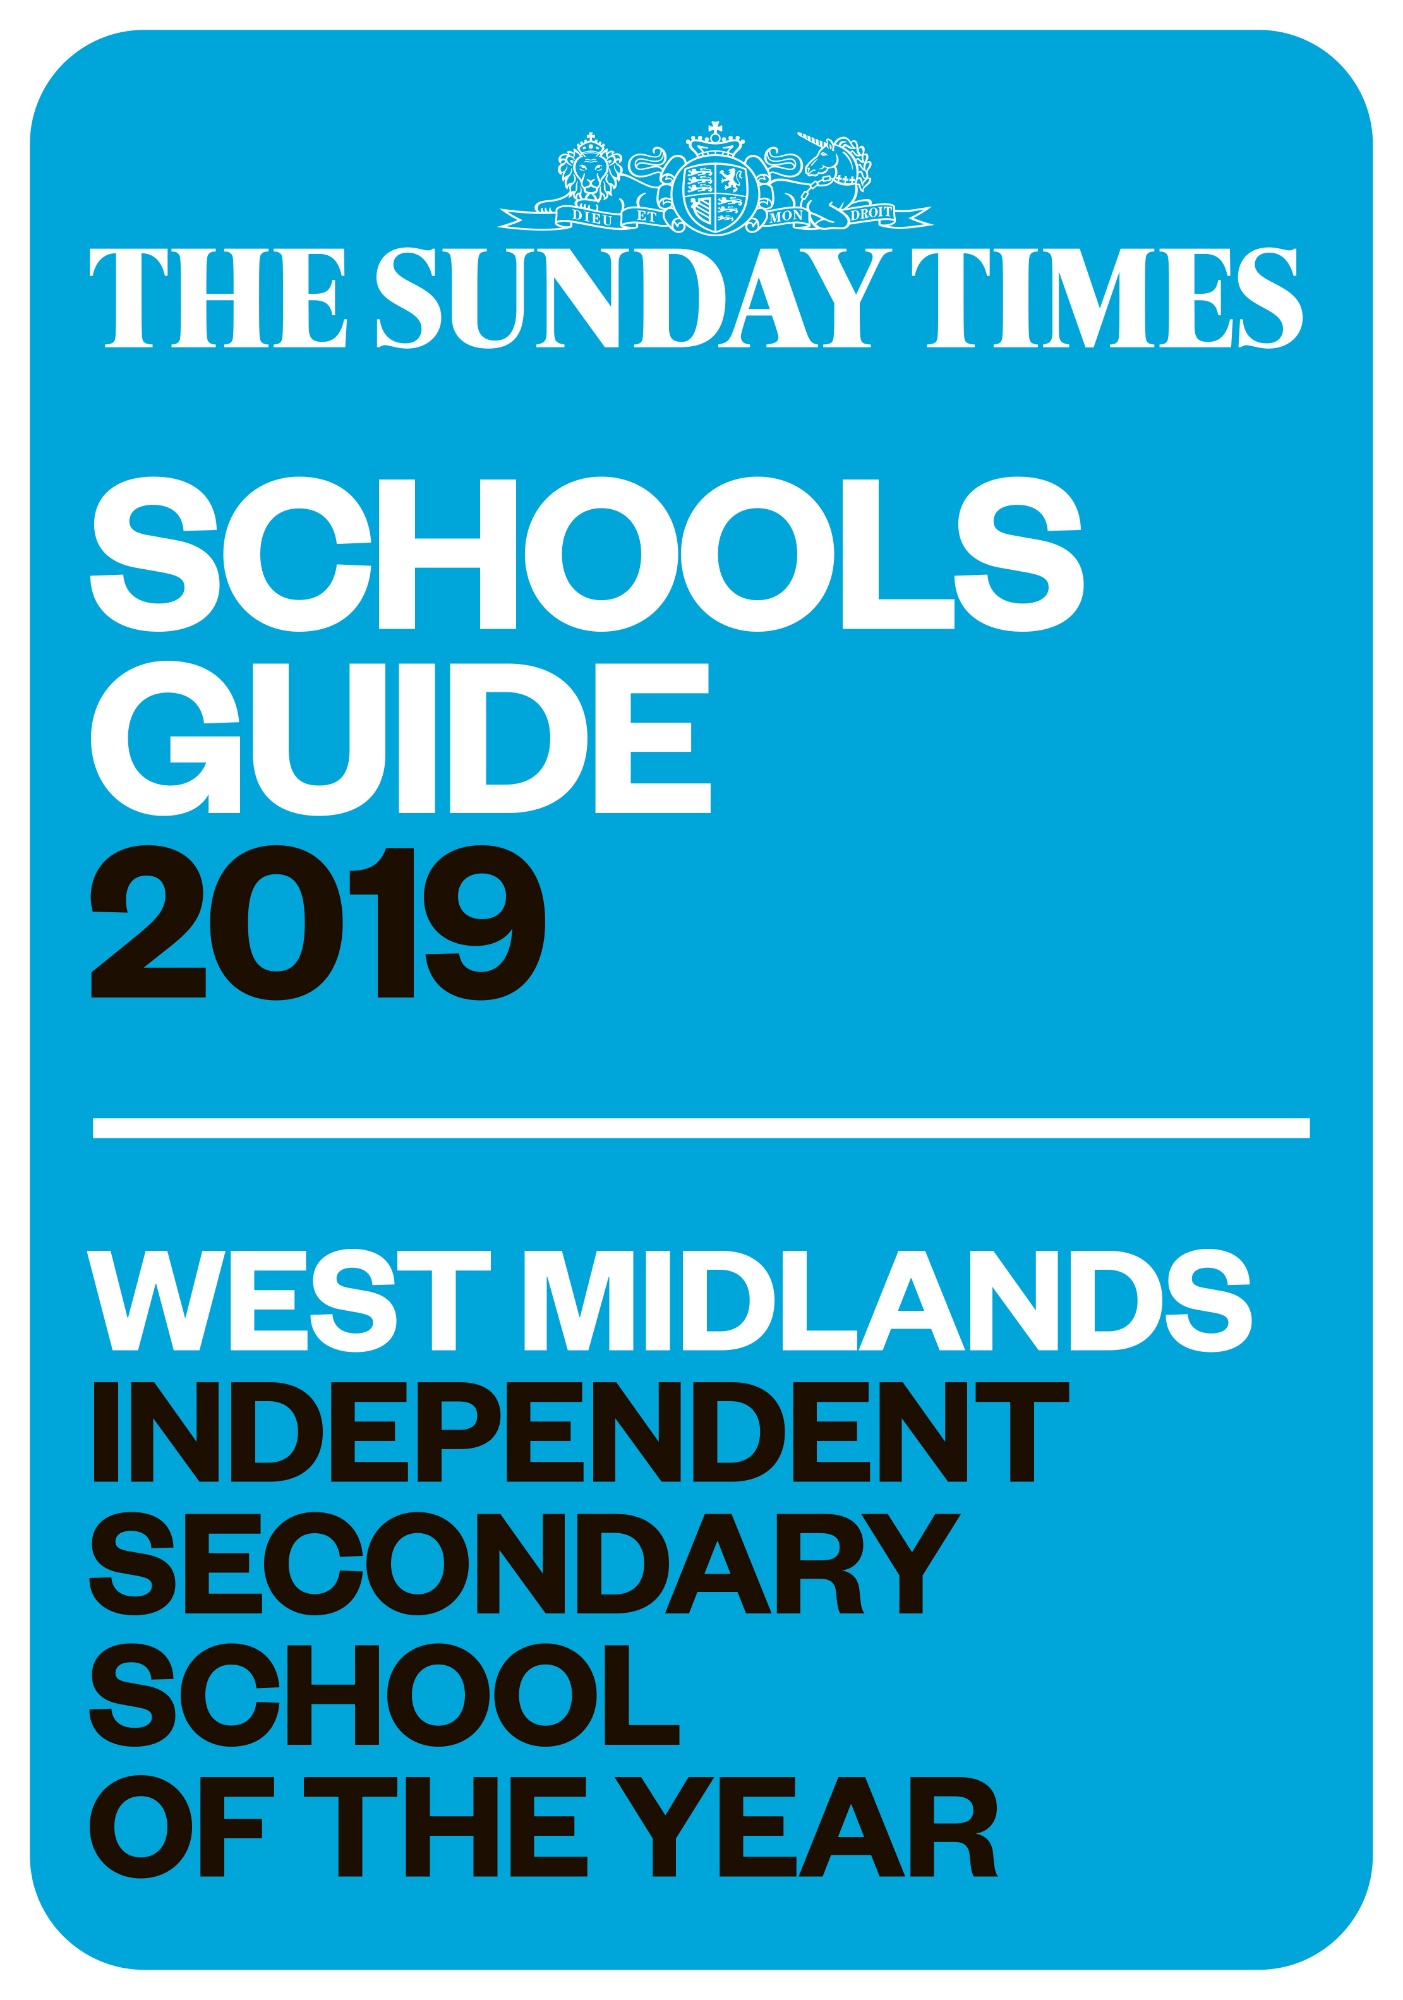 The Sunday Times West Midlands Independent Secondary School of the Year 2019